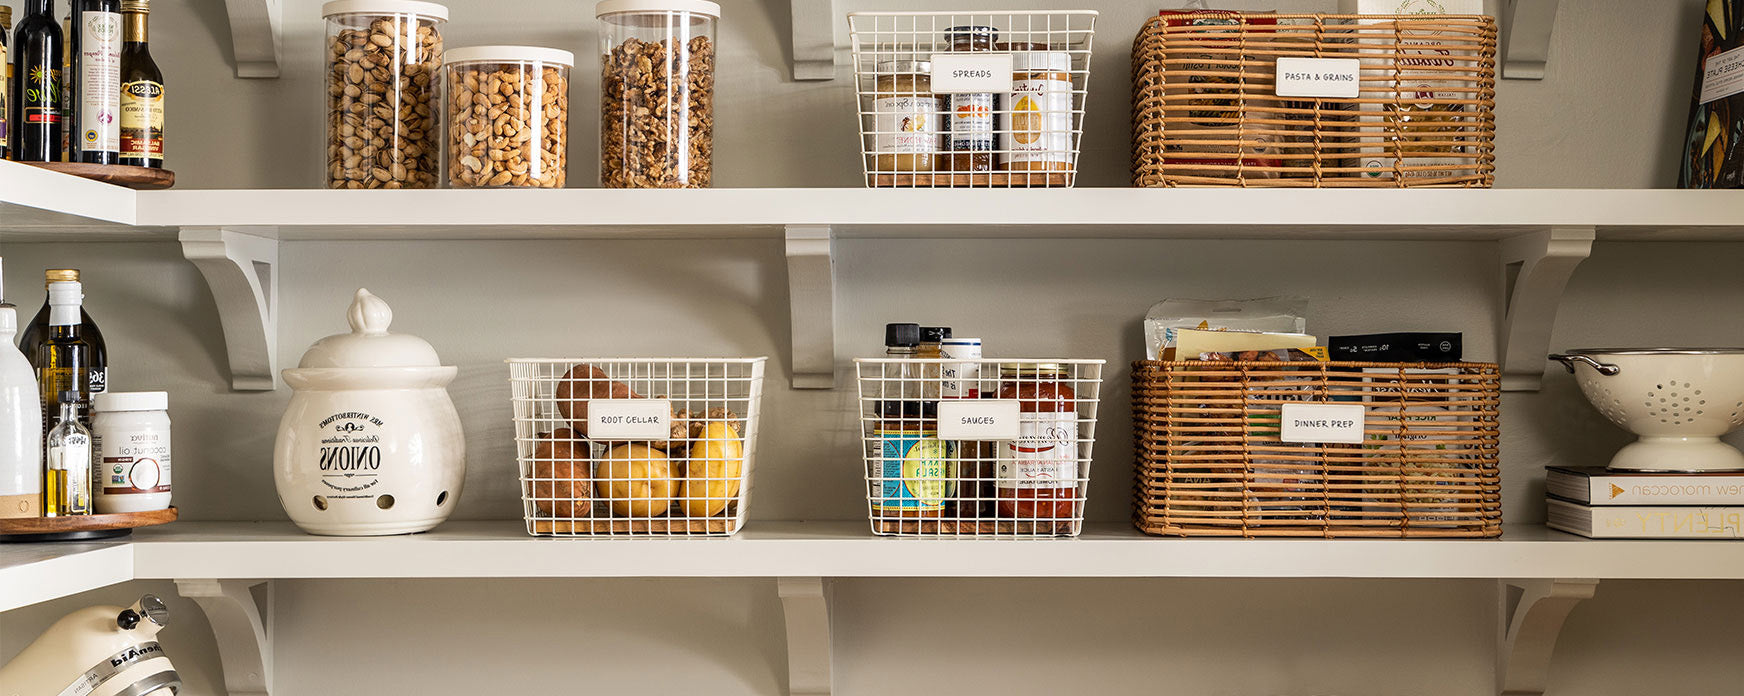 Organization and Storage Ideas for the New Year - Valley + Birch